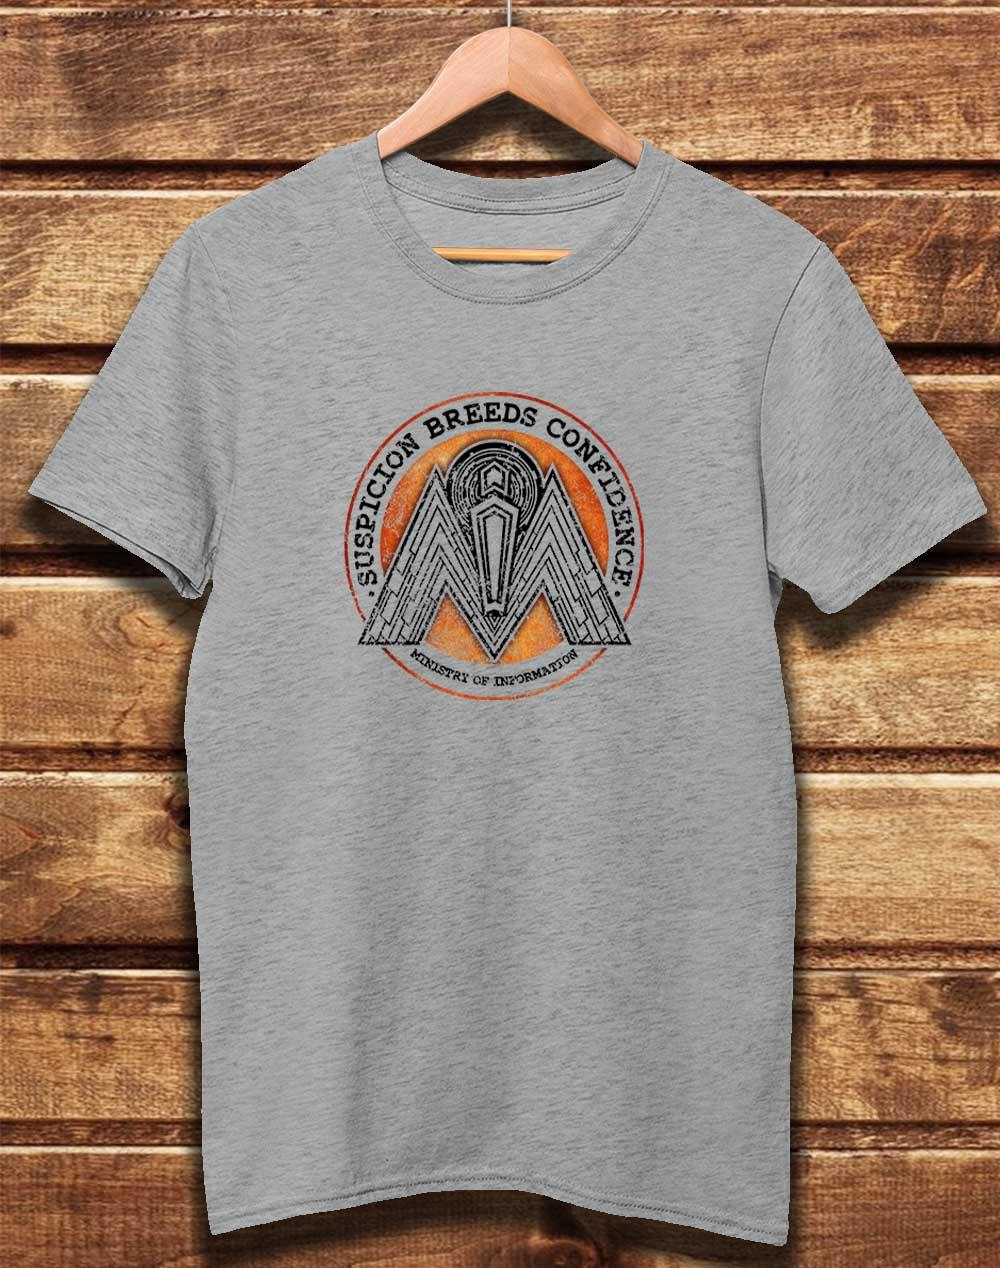 DELUXE Ministry of Information Organic Cotton T-Shirt XS / Melange Grey  - Off World Tees